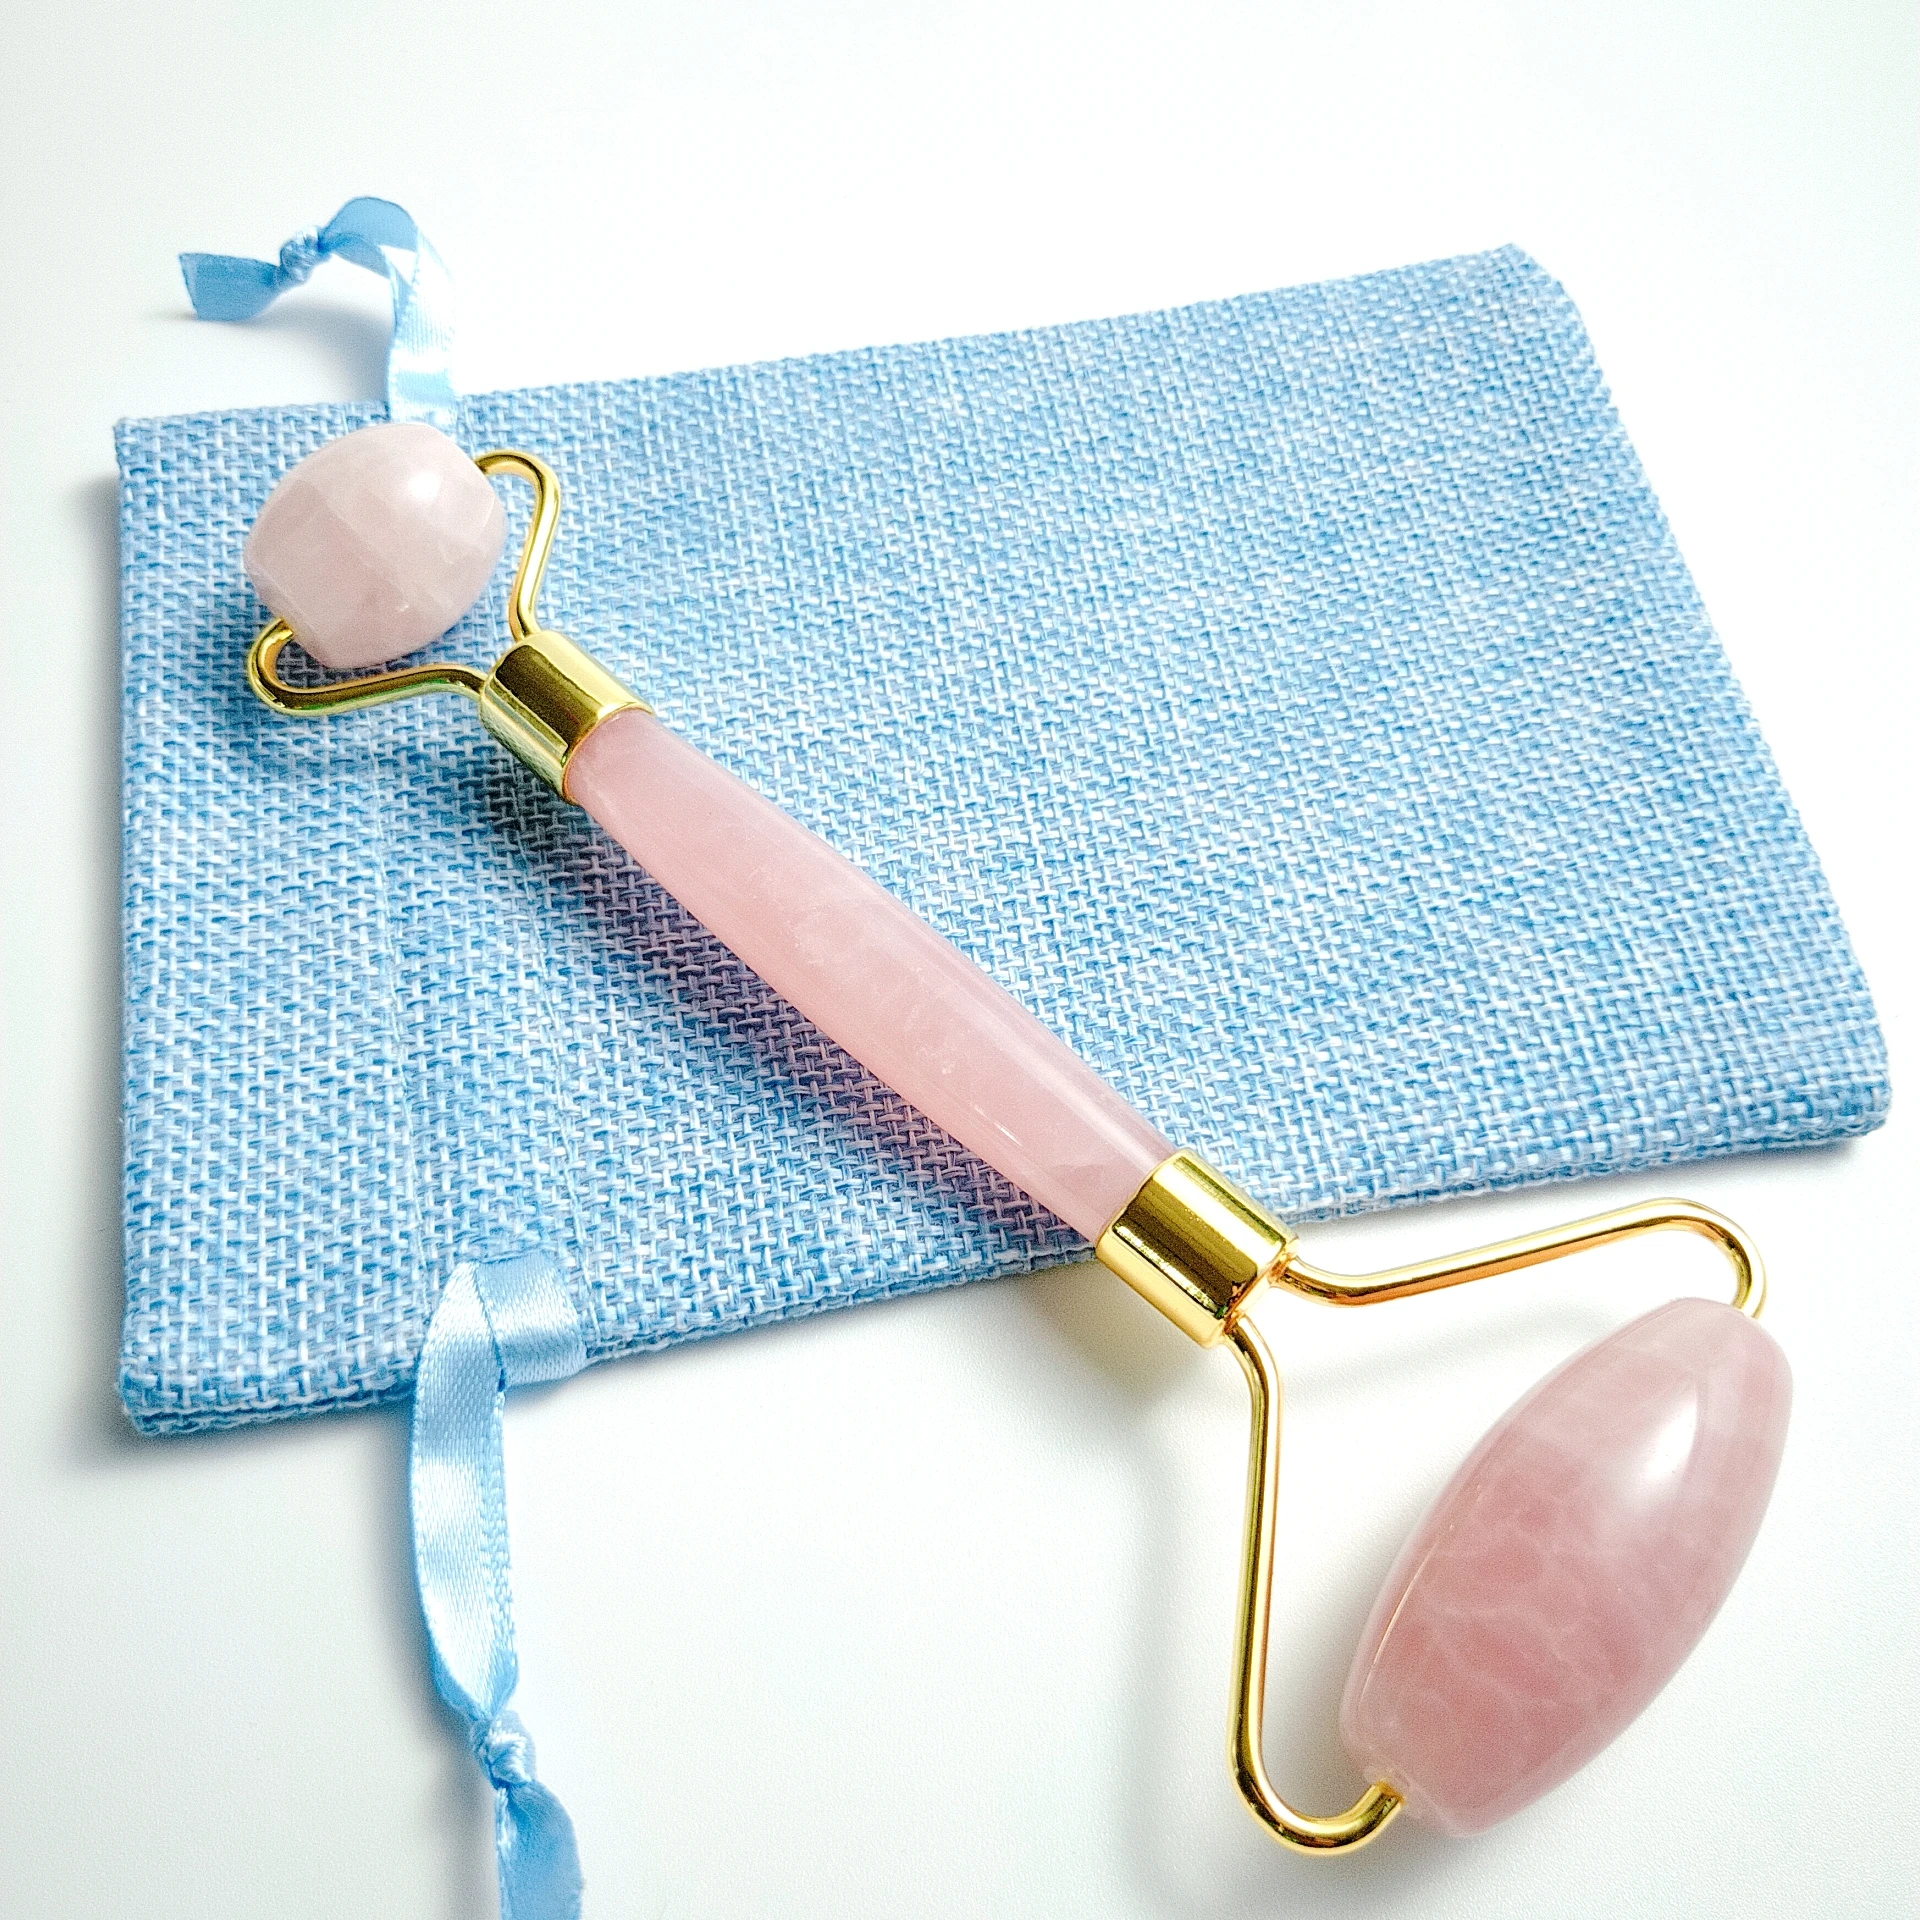 

Natural Rose quartz Jade Roller for Face - Face Roller Gua Sha Scrapping - Aging Wrinkles,Puffiness Facial Skin Massager